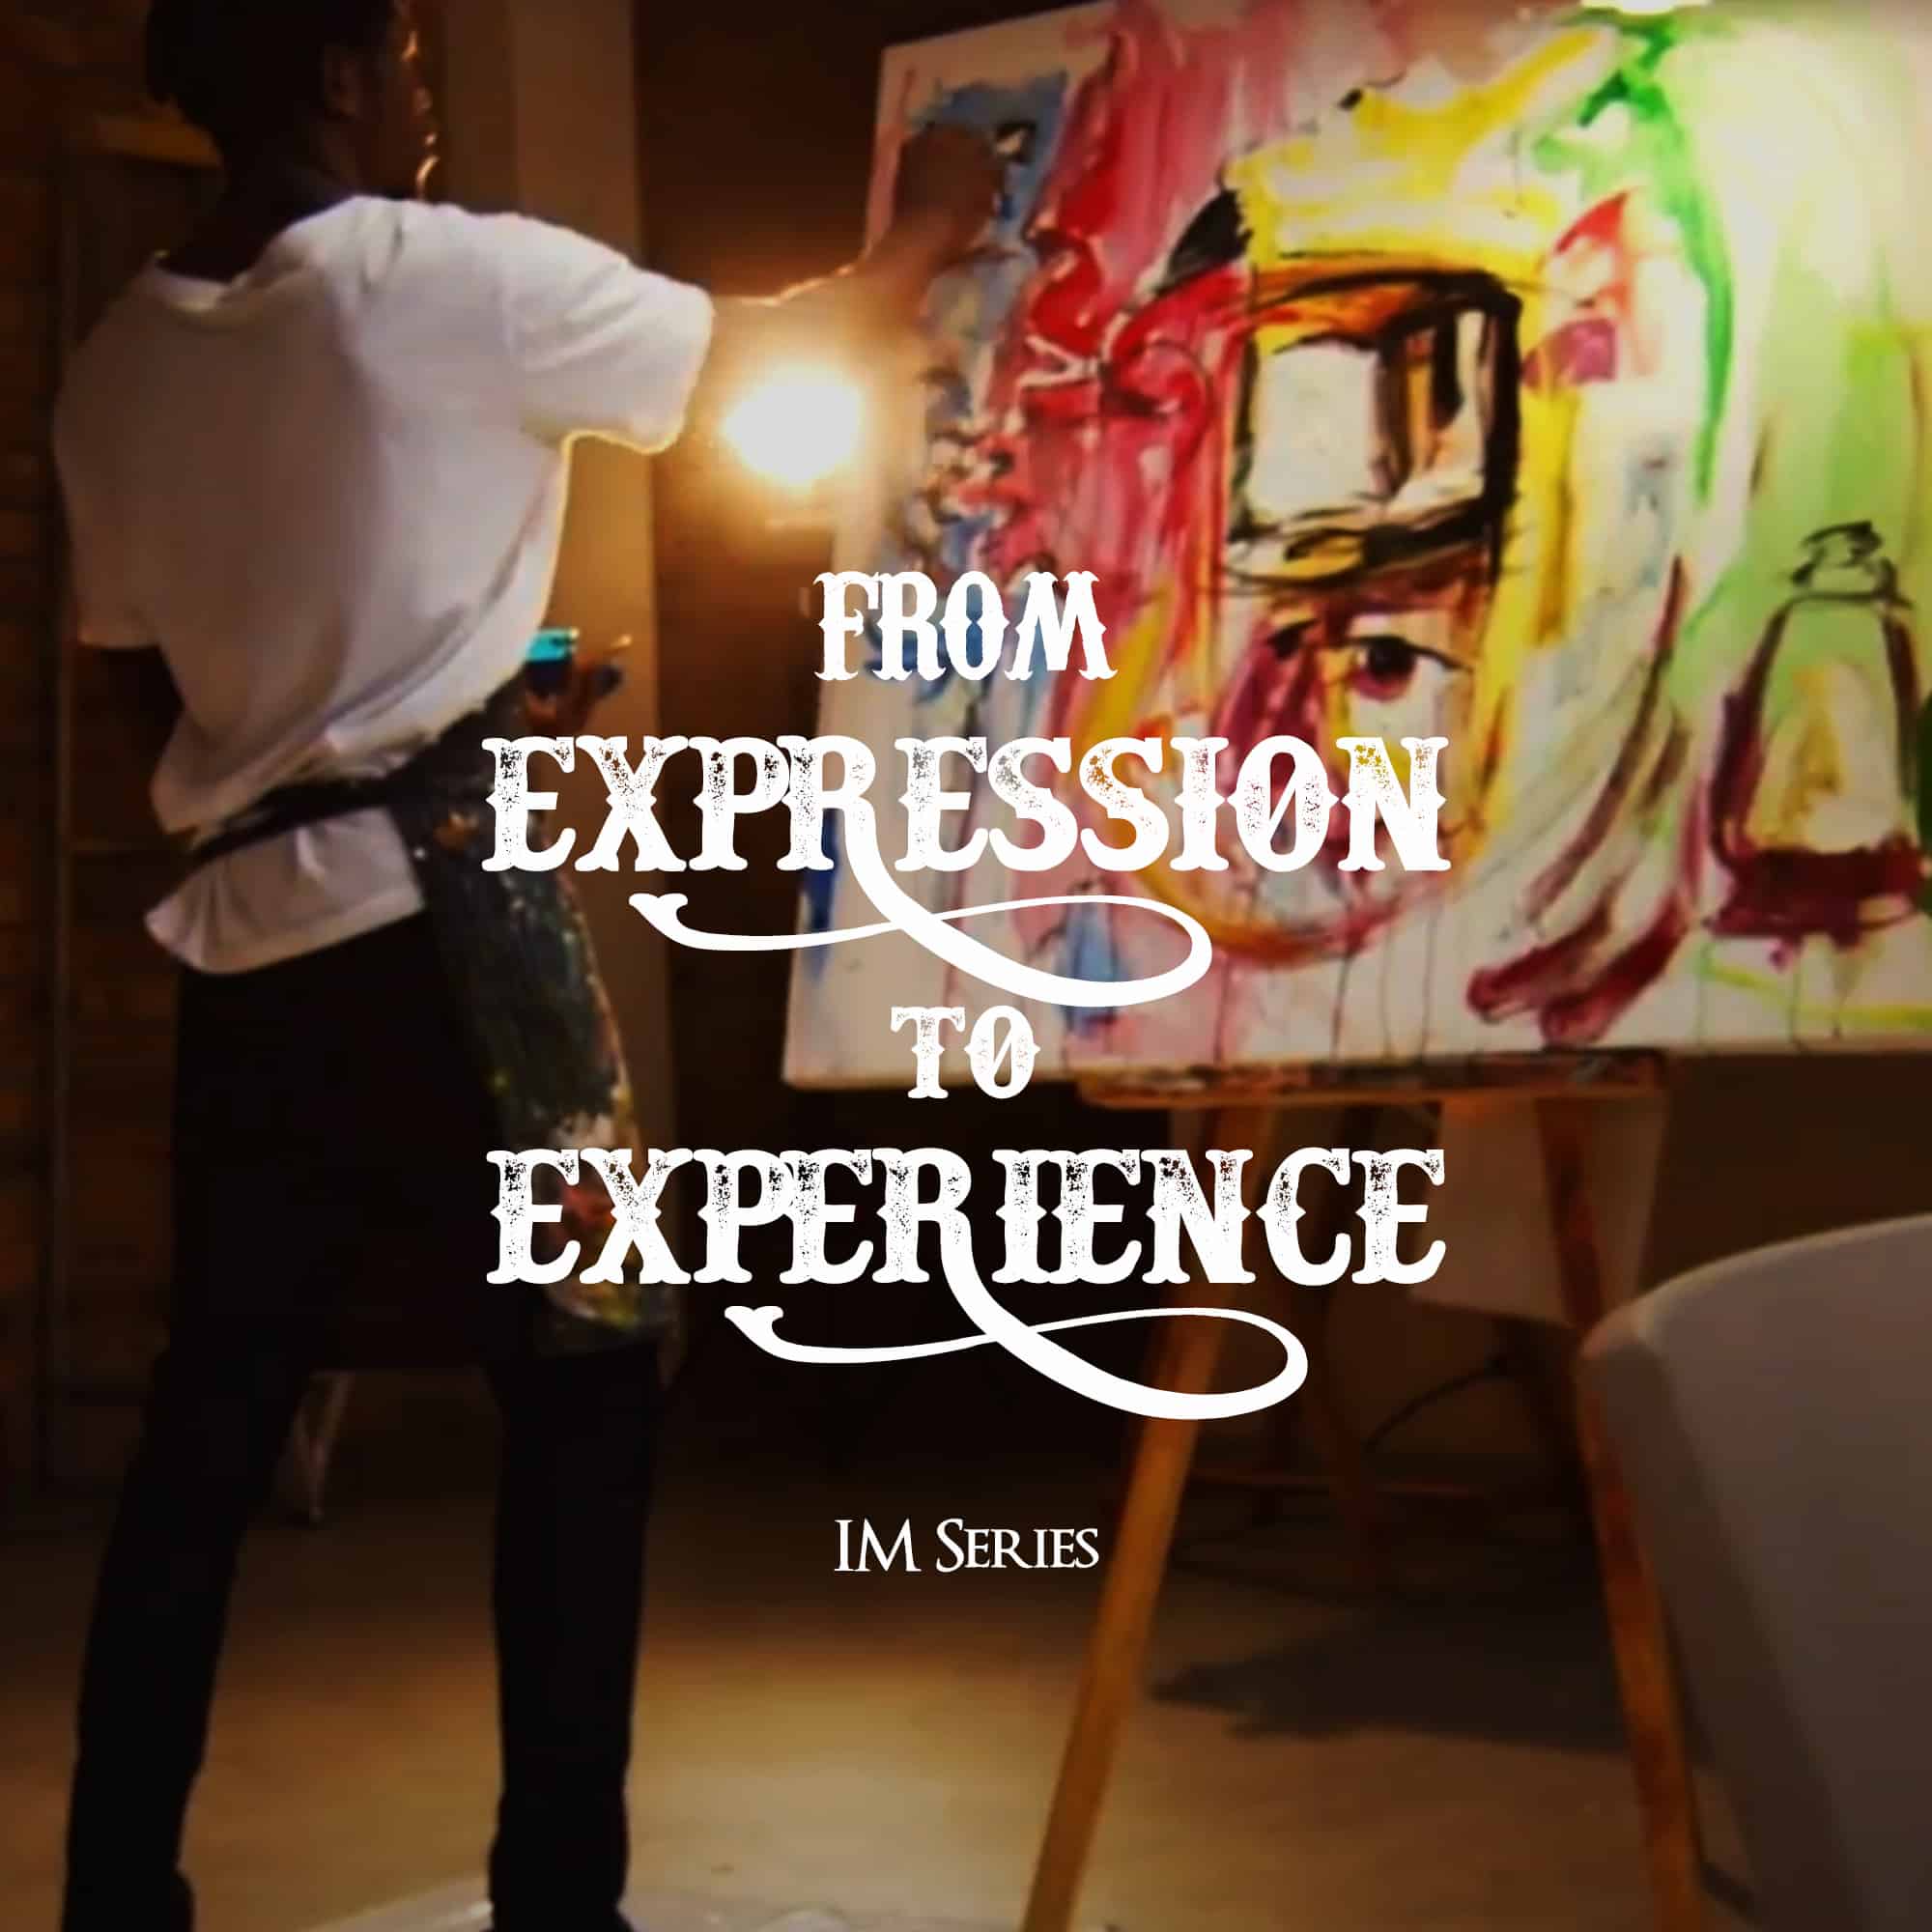 IM Series - From Expression to Experience breaks down to an understandable construct so we can start working with it in our families, our businesses and our lives. And we start at the beginning with: the word. #expression #experience #families #reality #business #communication #mental #emotional #vibrational #expressiontoexperience #explore #life #series #messages #power #IMSeries #SuperPowerExperts